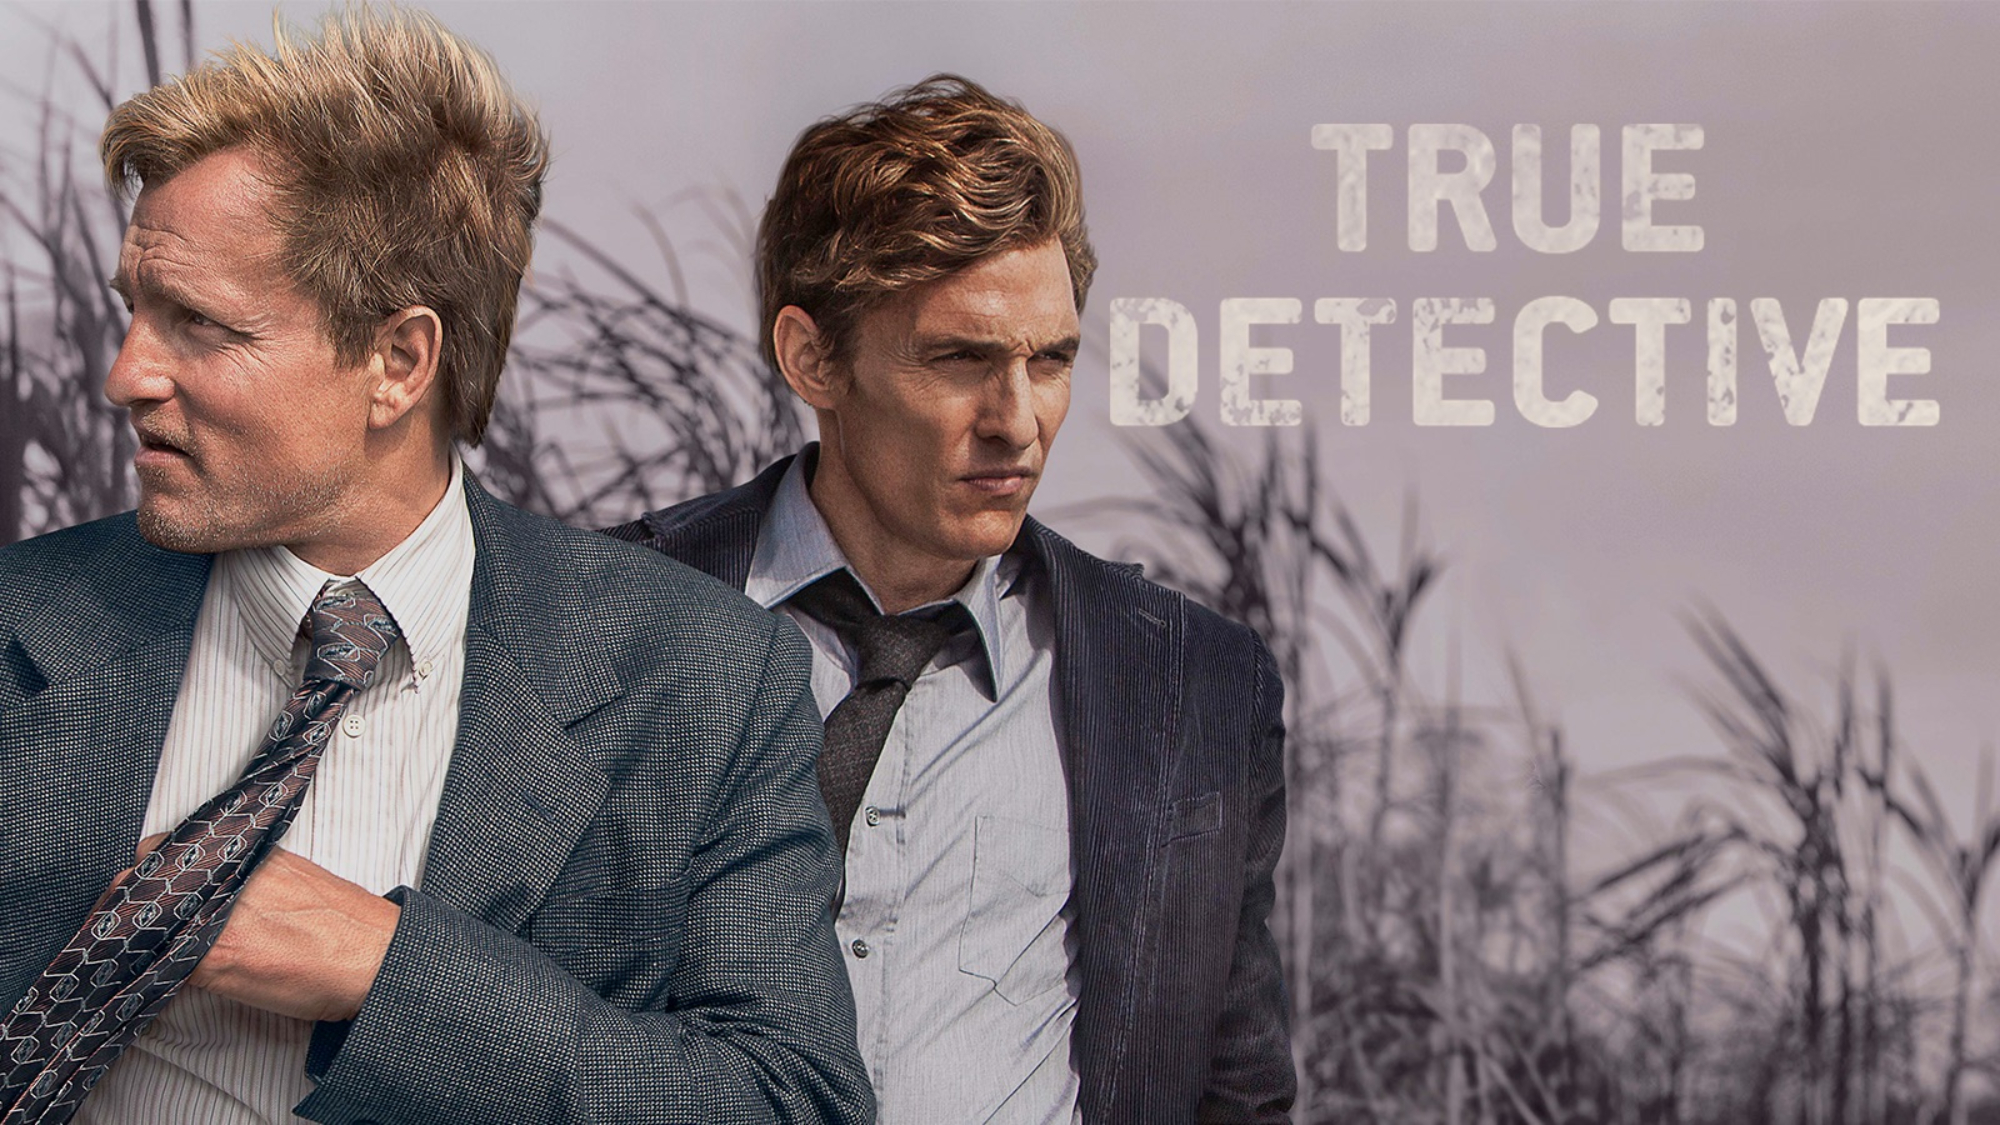 True detective marty and rust фото 100